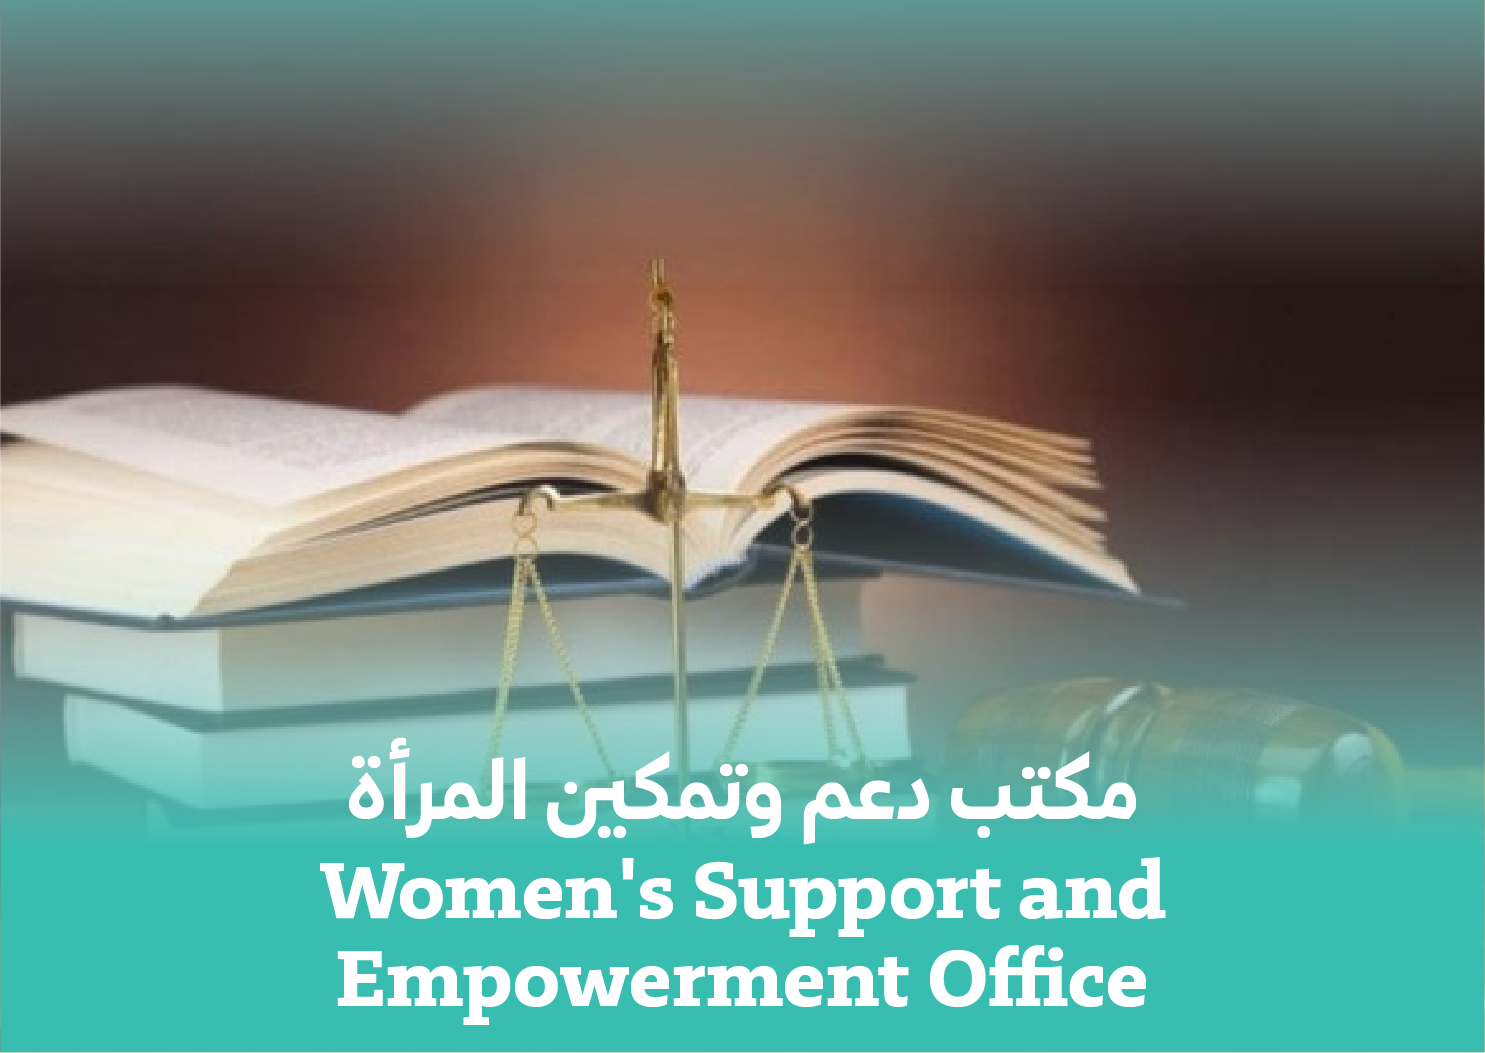 Women's Support and Empowerment Office